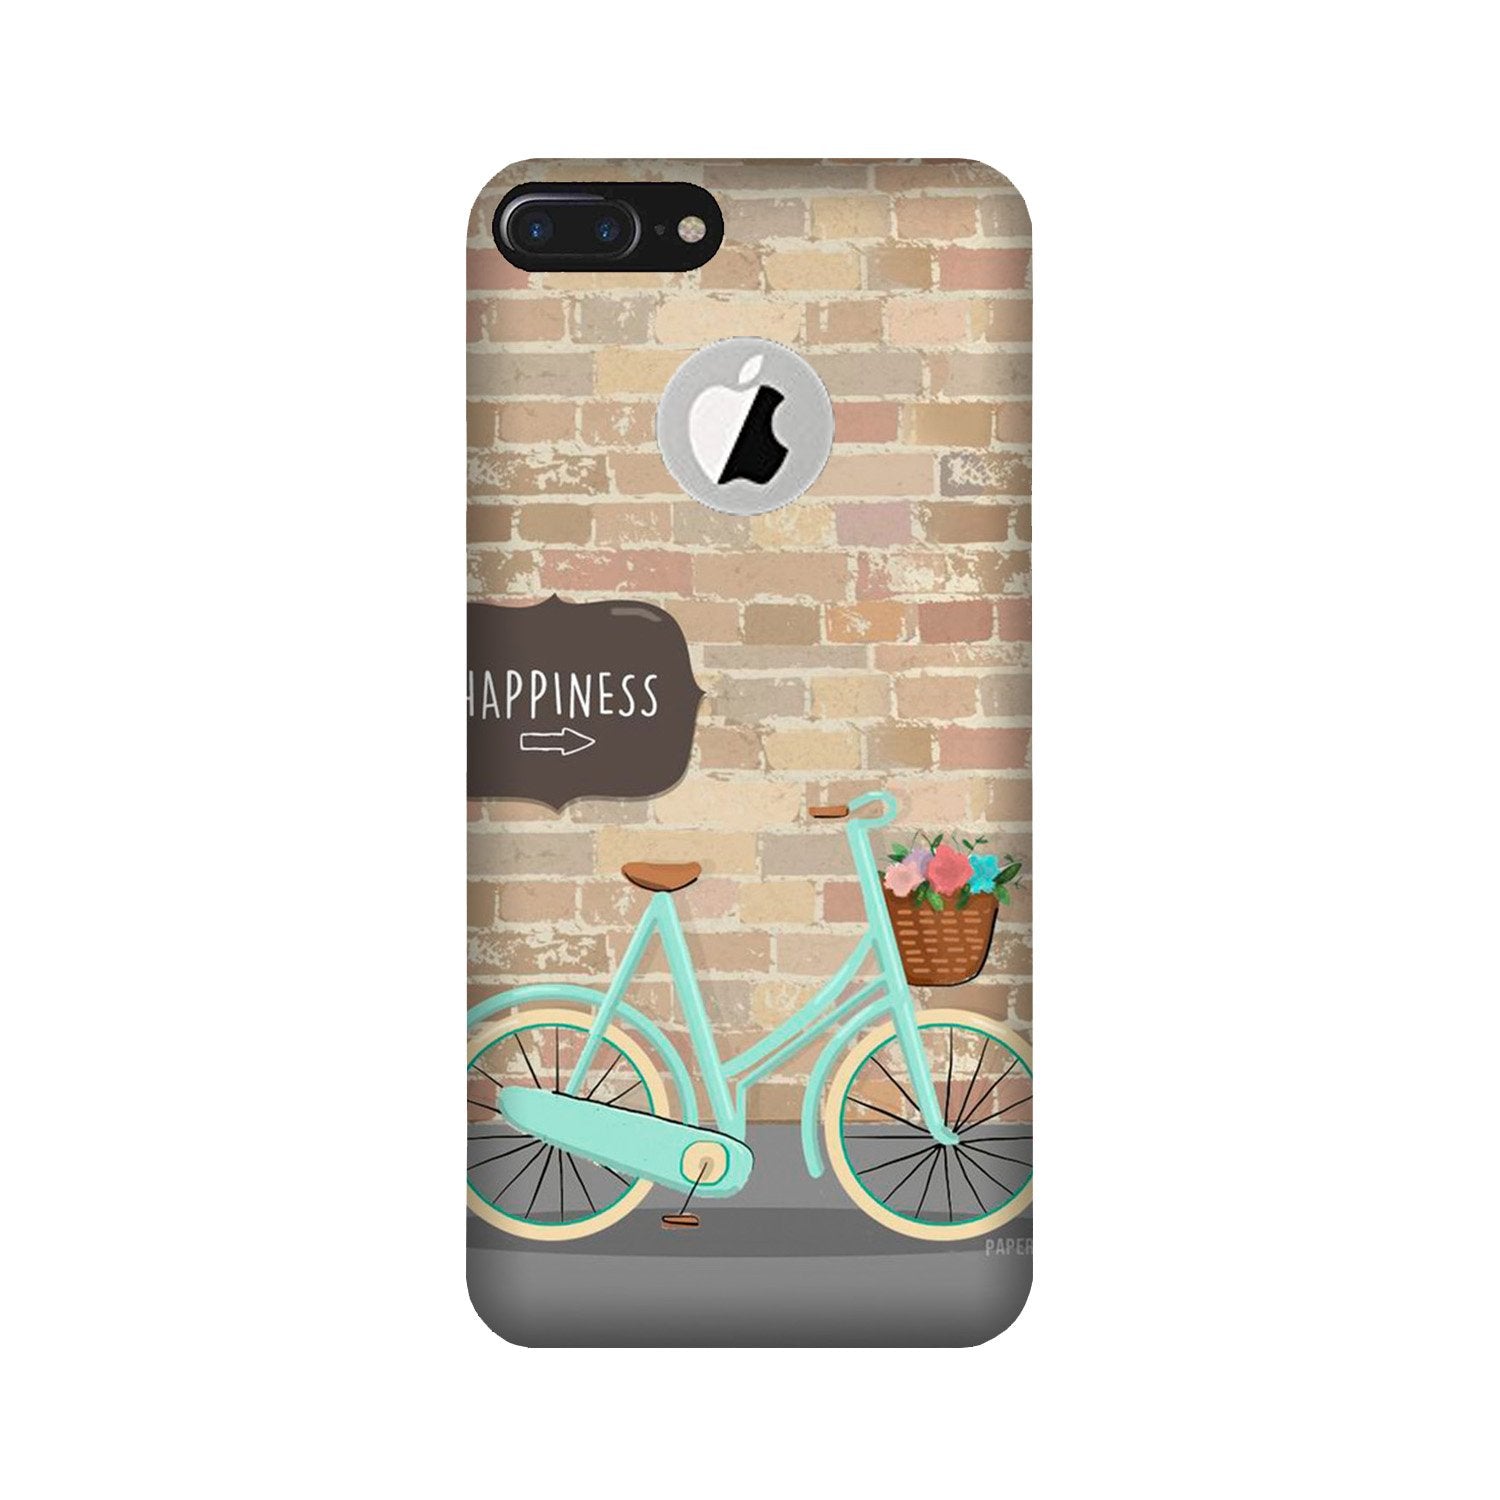 Happiness Case for iPhone 7 Plus logo cut